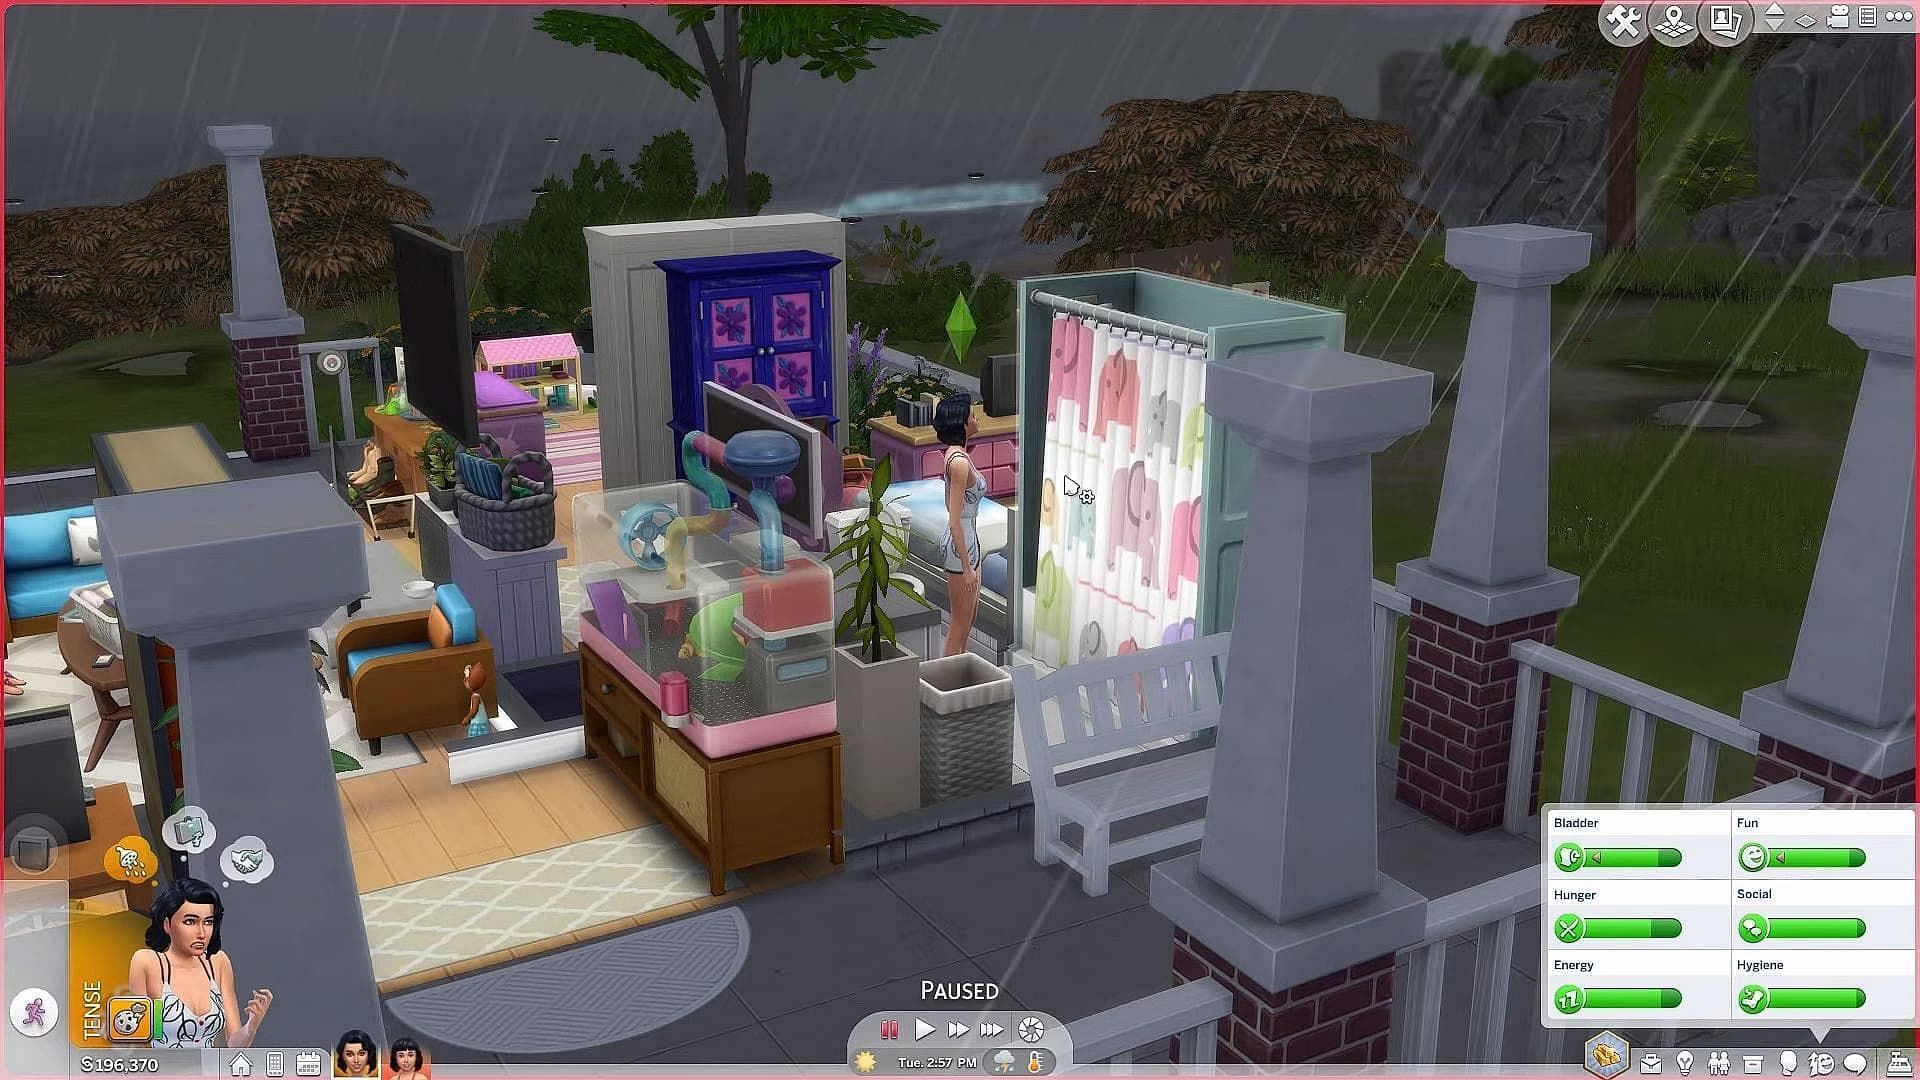 unlock all objects in The Sims 4